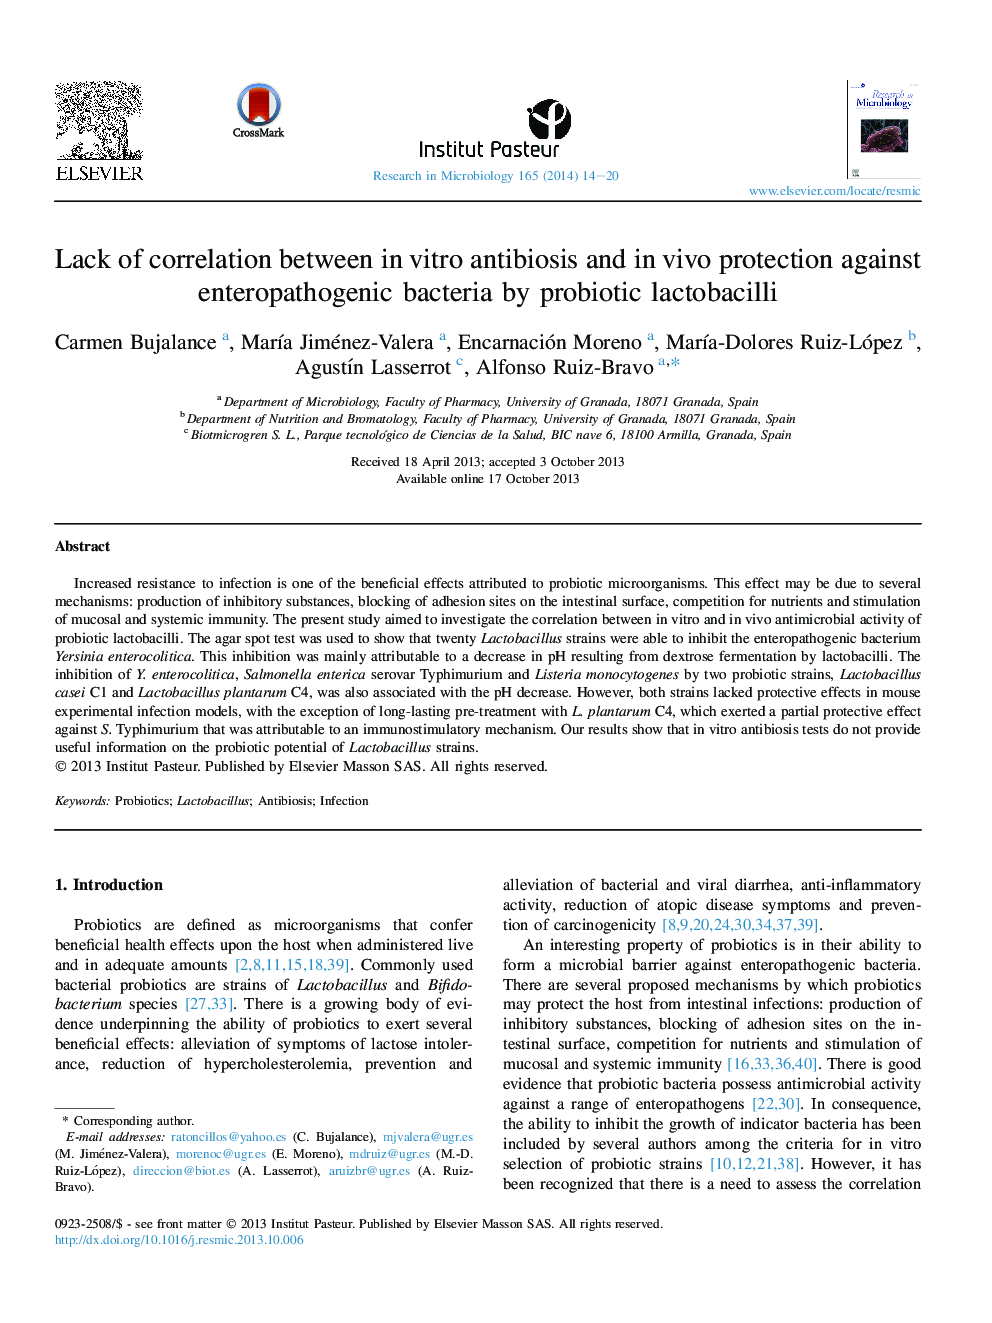 Lack of correlation between inÂ vitro antibiosis and inÂ vivo protection against enteropathogenic bacteria by probiotic lactobacilli